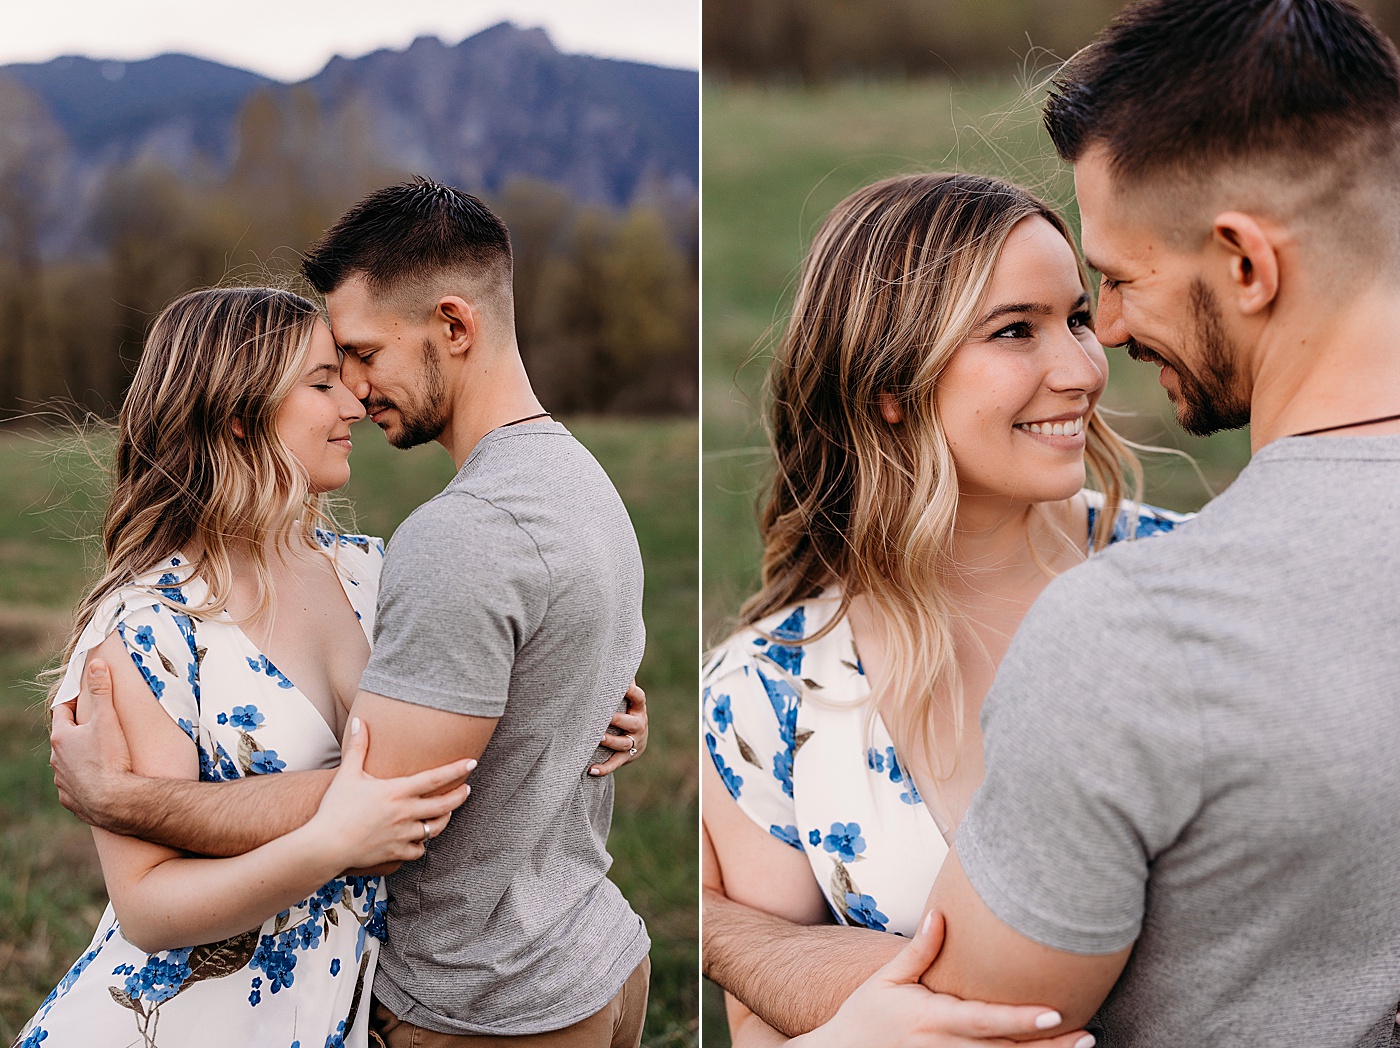 Couple embracing each other during engagement session | Photo by Megan Montalvo Photography